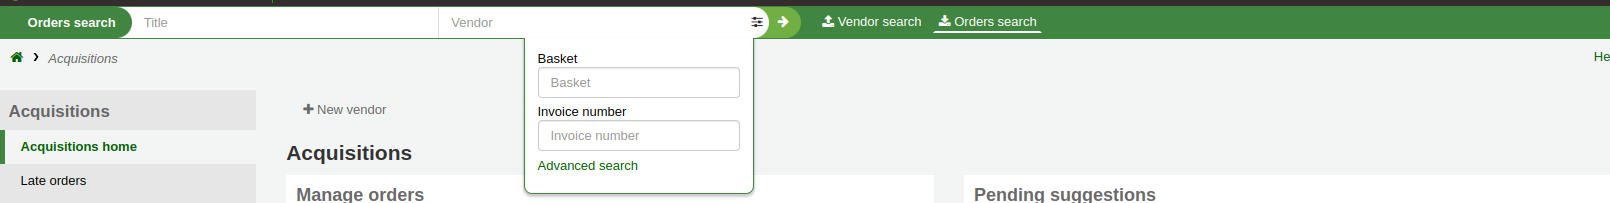 The search bar at the top of the page has two options in the acquisitions module, Vendor search and Orders search, this show the order search option, expanded